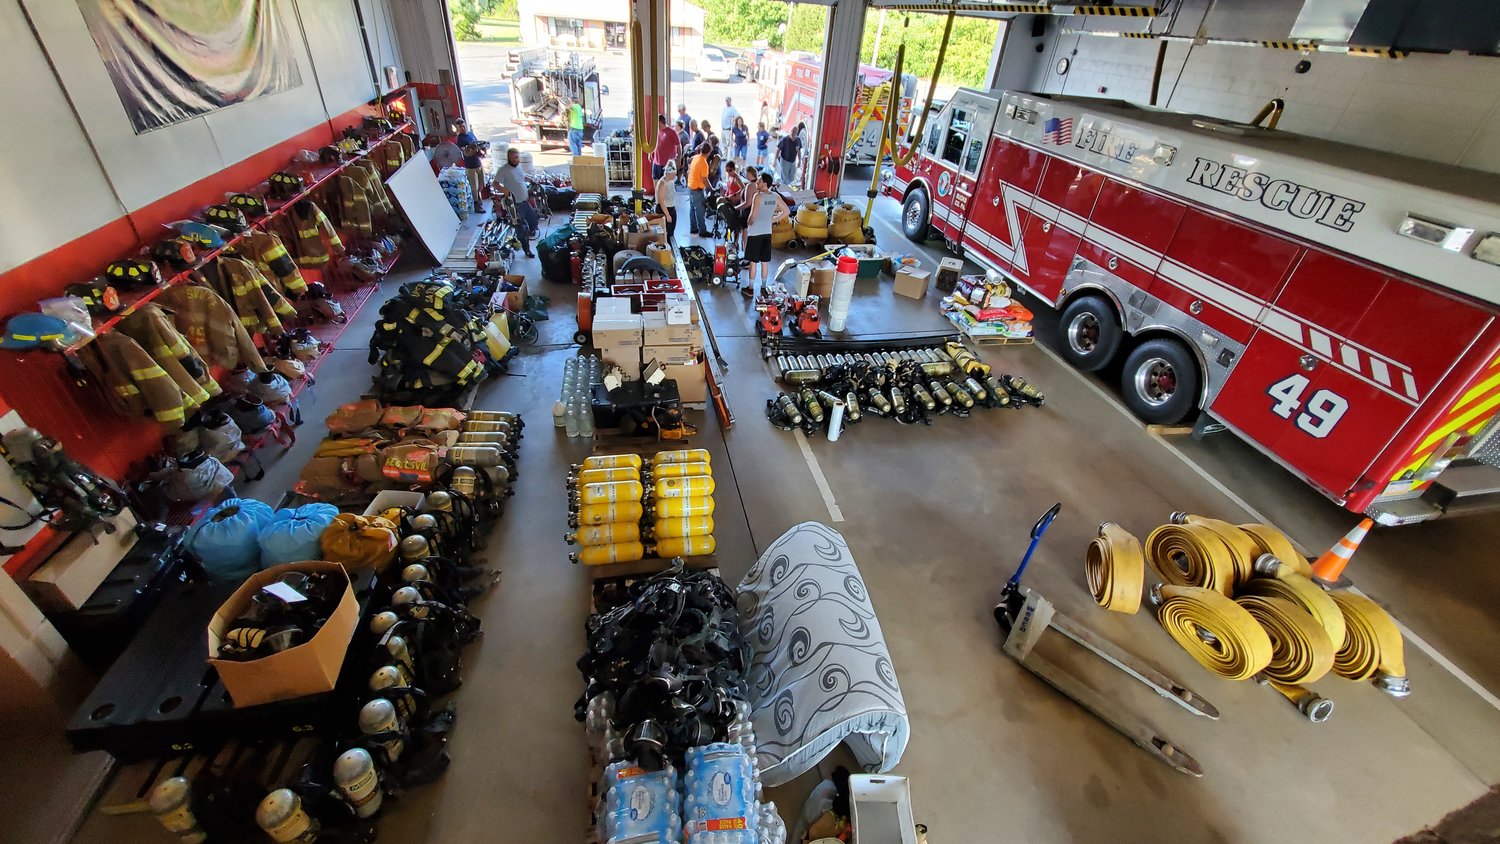 Volunteer firefighters from the Palisades Regional district gathered supplies at the Ottsville Firehouse before the trip to Kentucky to aid fire companies in flooded areas.